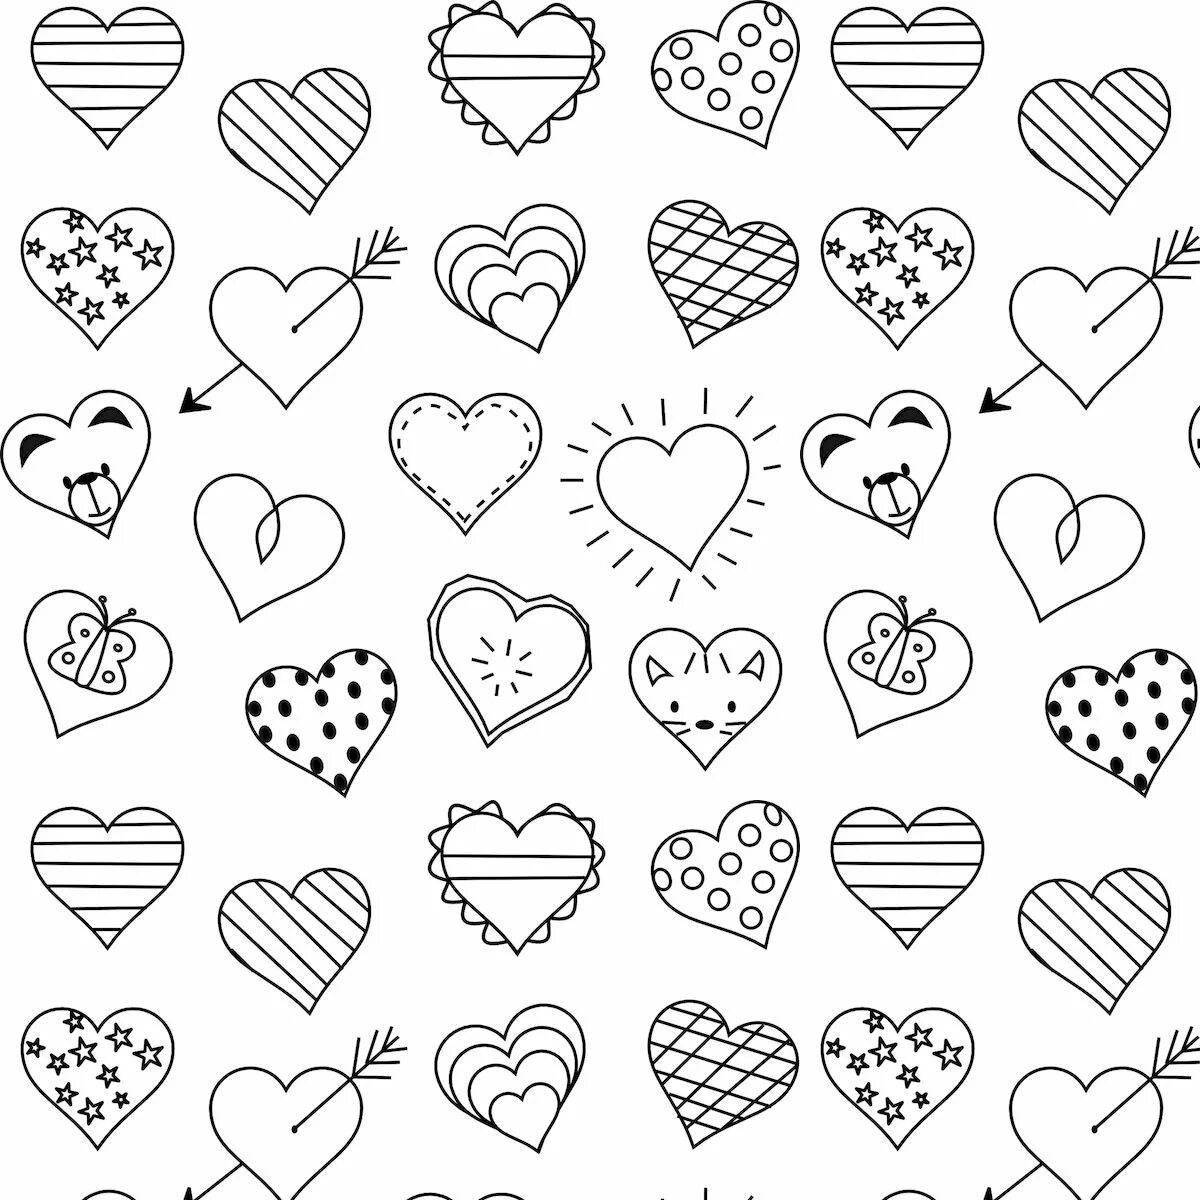 Colorful coloring page with little hearts